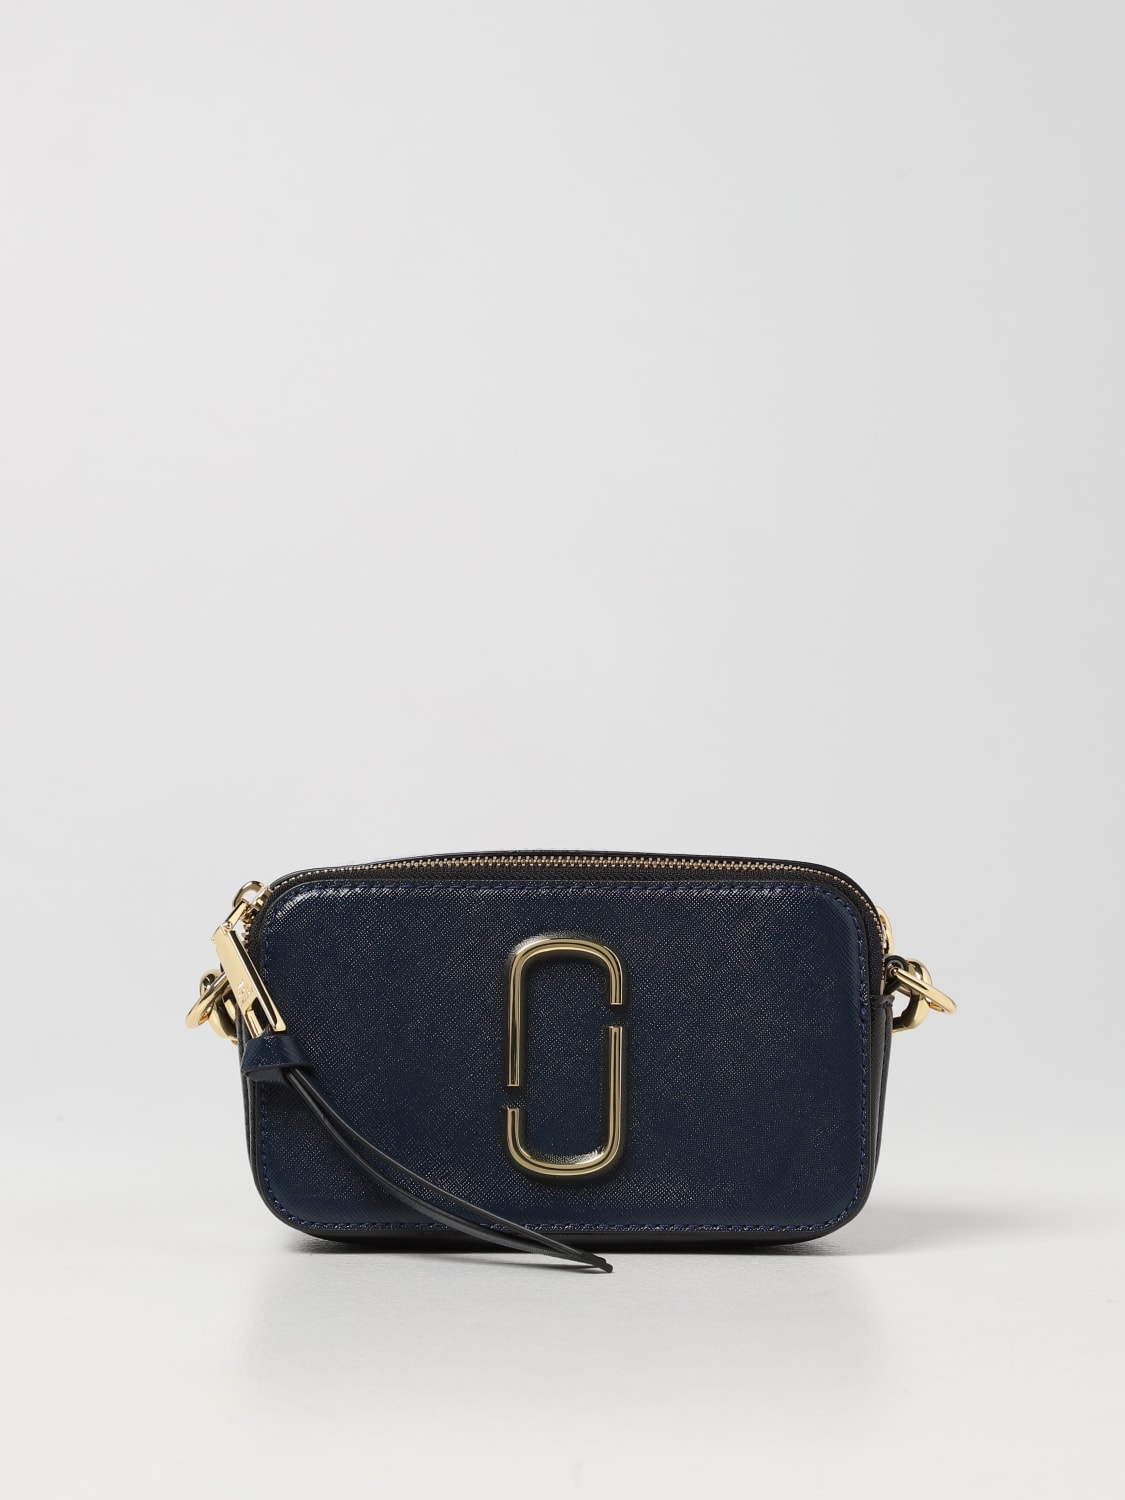 Marc Jacobs Snapshot Saffiano Leather Bag, Bags